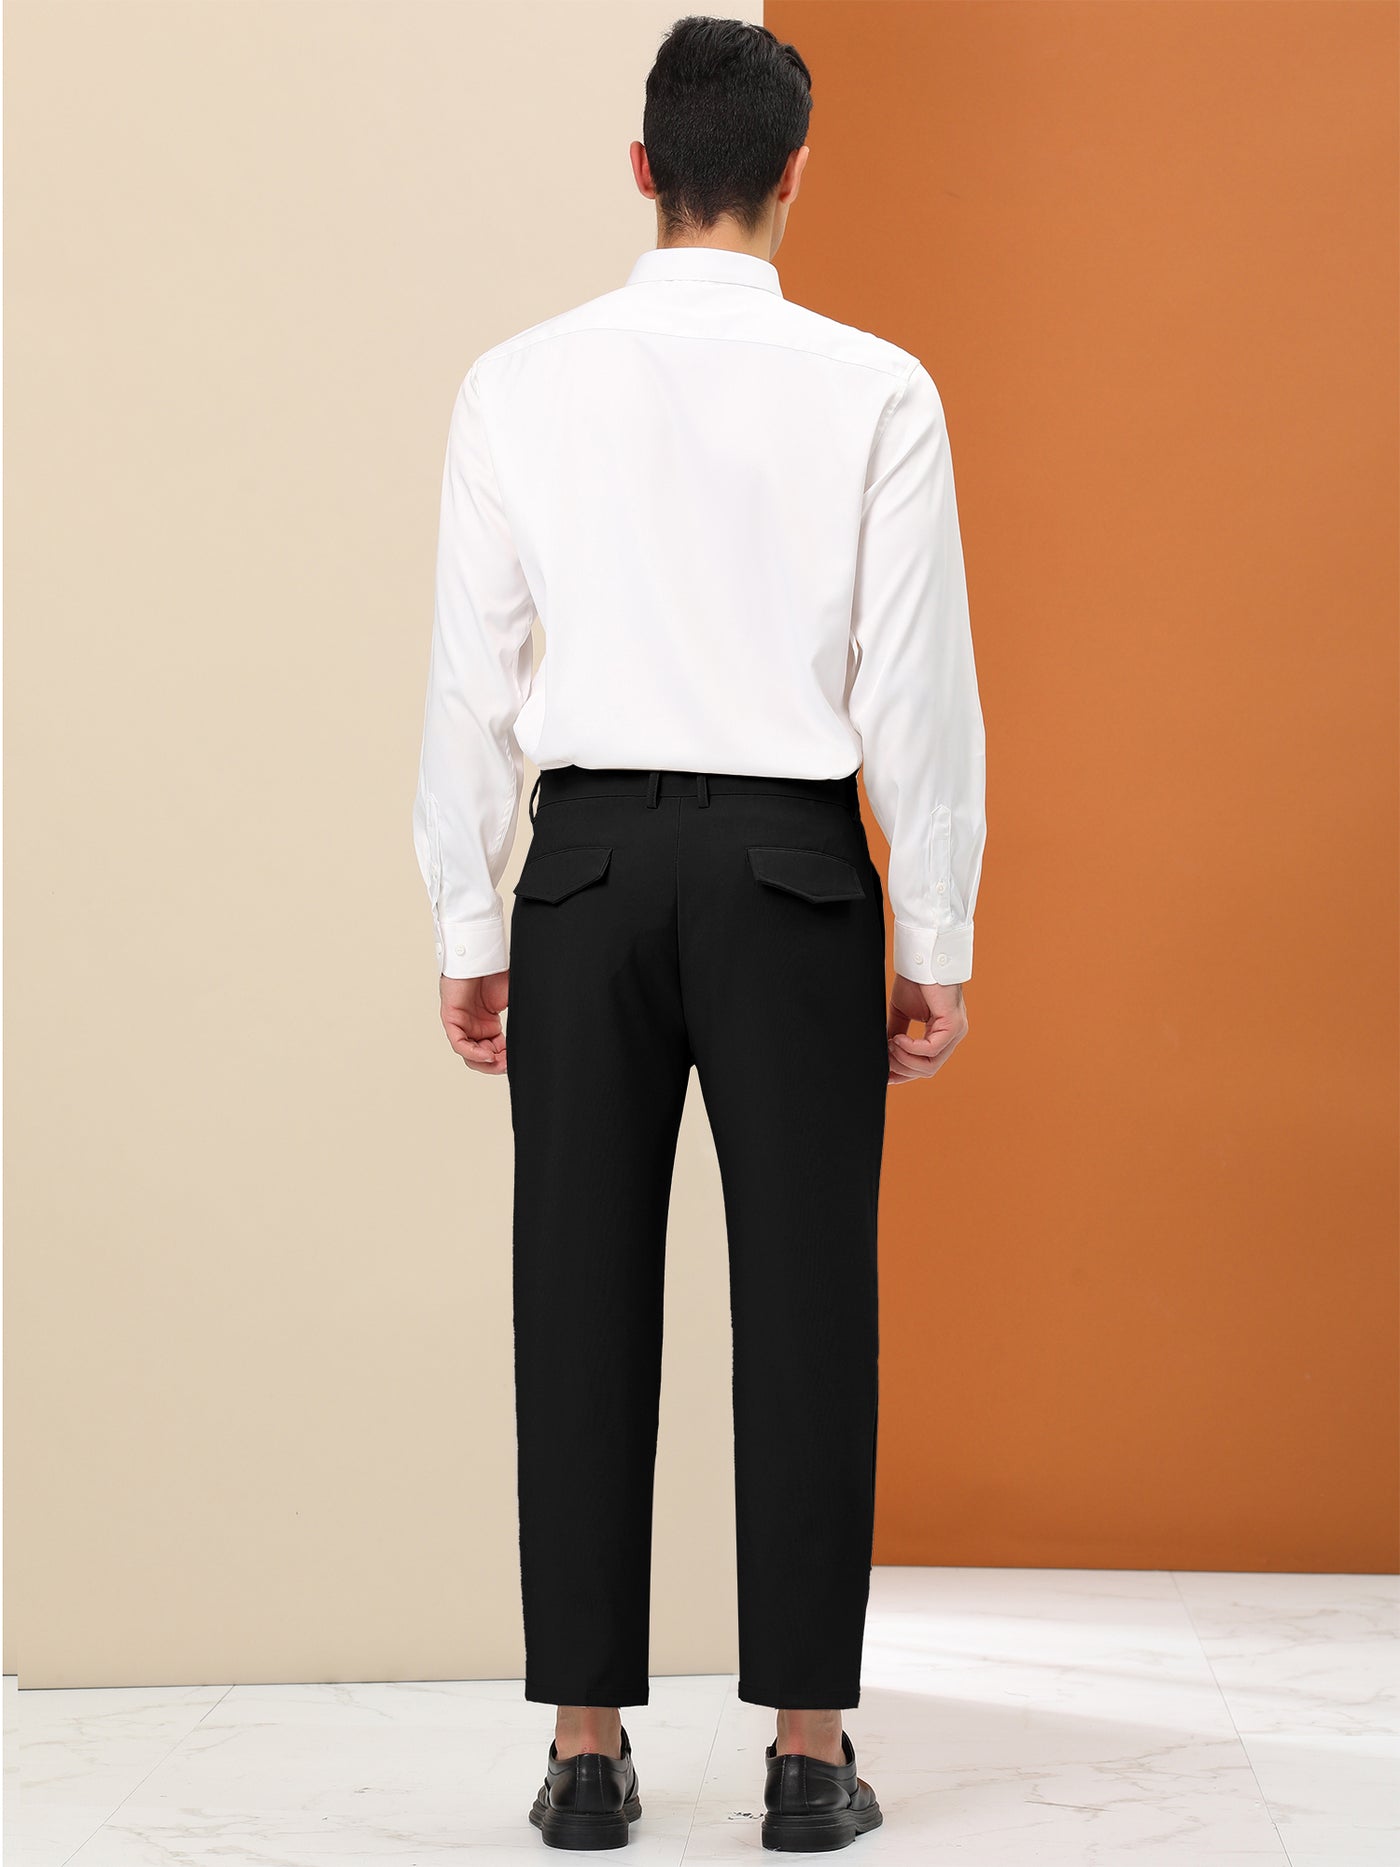 Bublédon Straight Fit Flat Front Solid Business Trousers with Belt